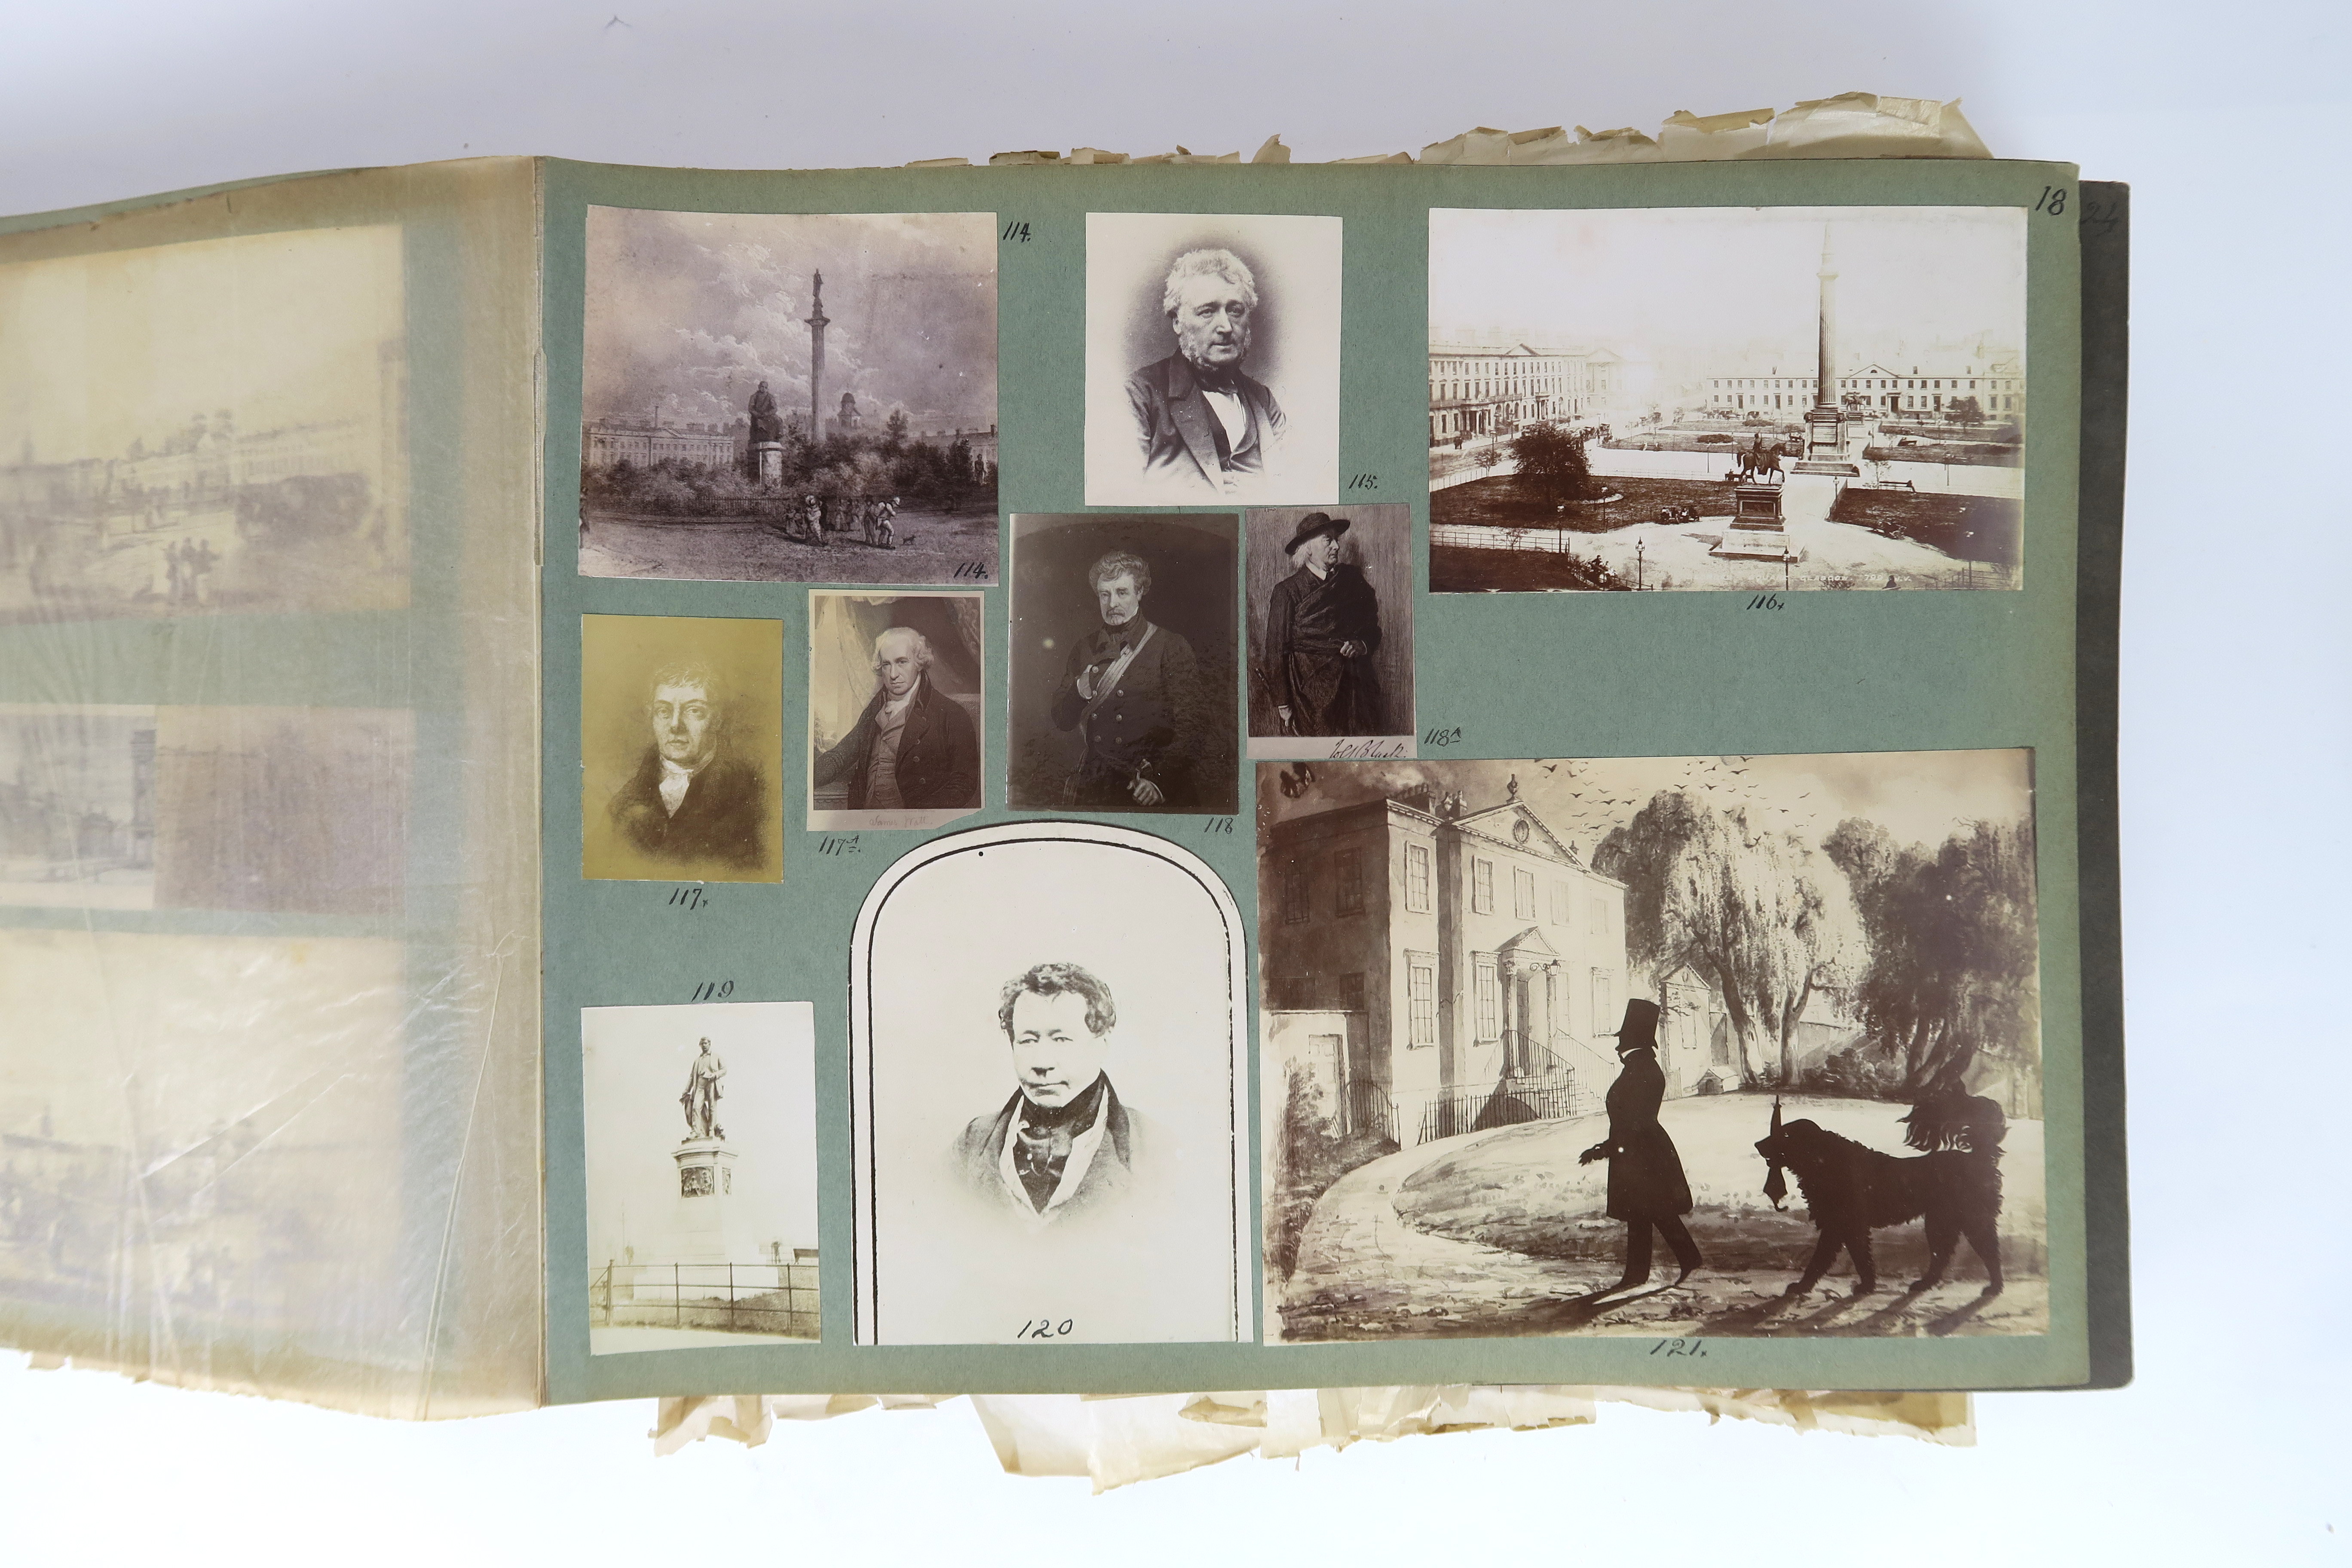 A RARE 19TH CENTURY ALBUM GLASGUA (GLASGOW) AND SUBURBS Set with photographic and printed images - Image 3 of 10